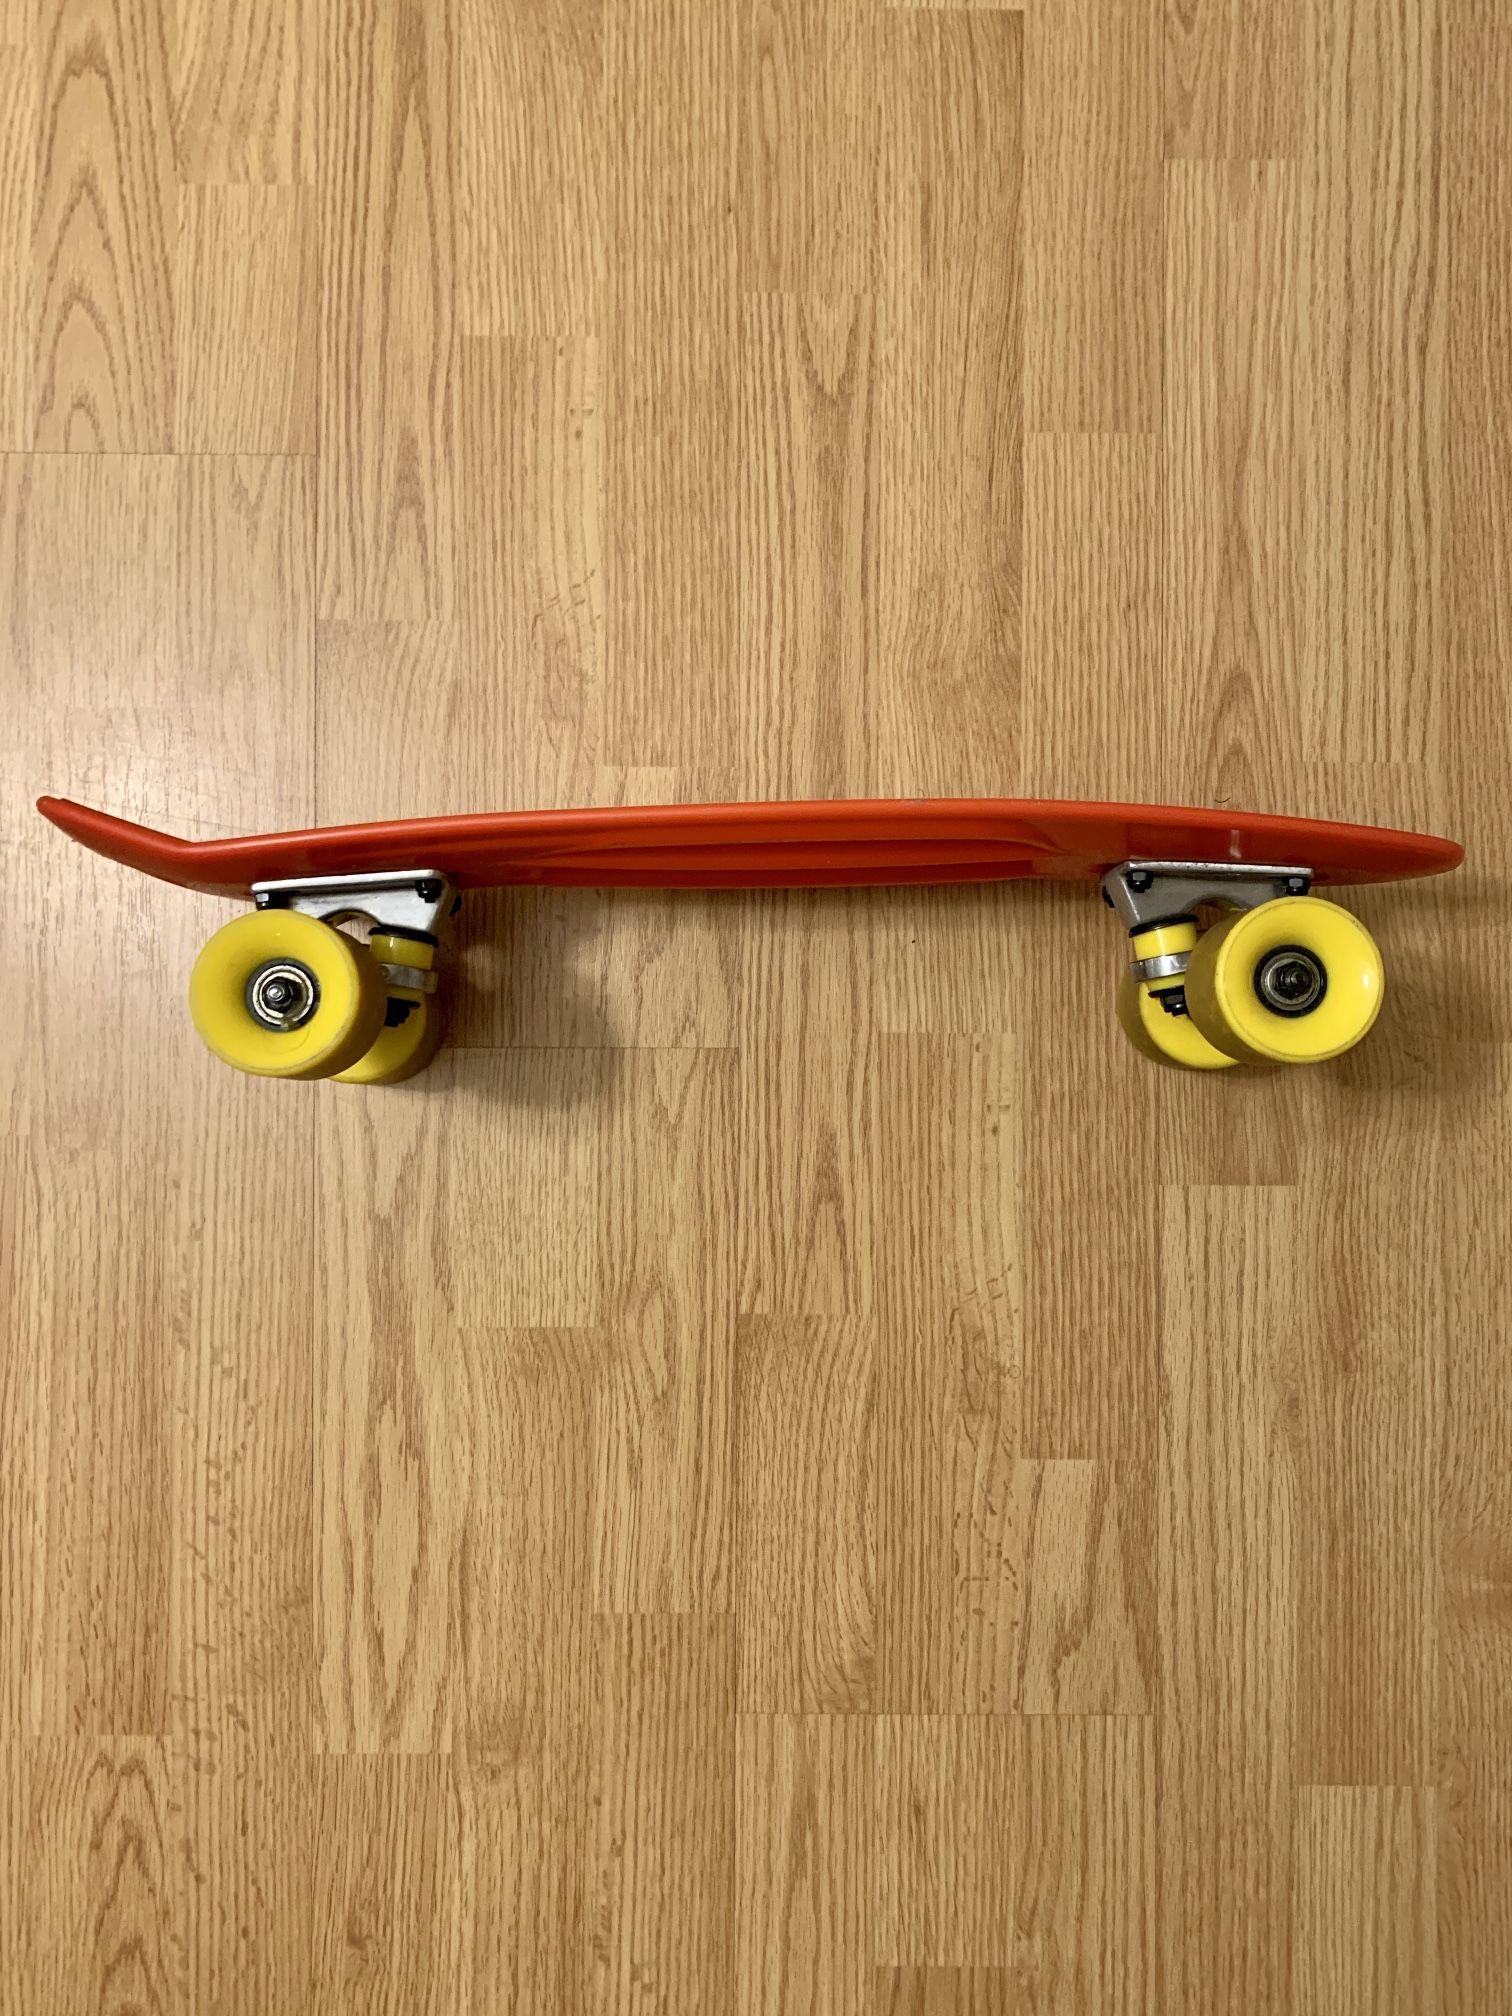 Red Penny Board